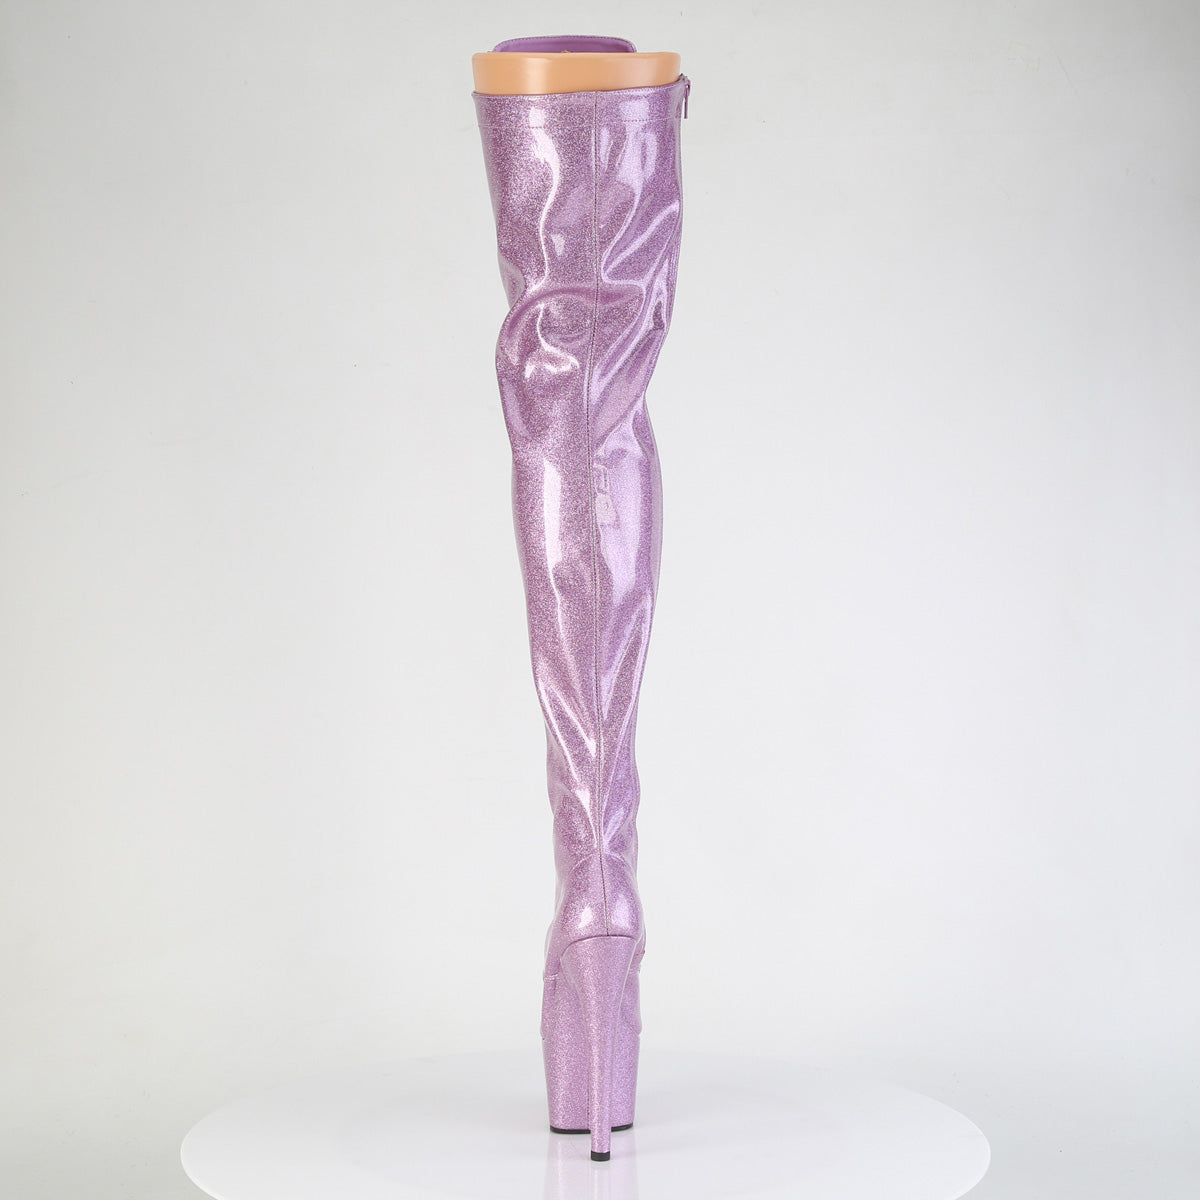 ADORE-3020GP Pleaser Pole Dancing Lilac Thigh High Boots